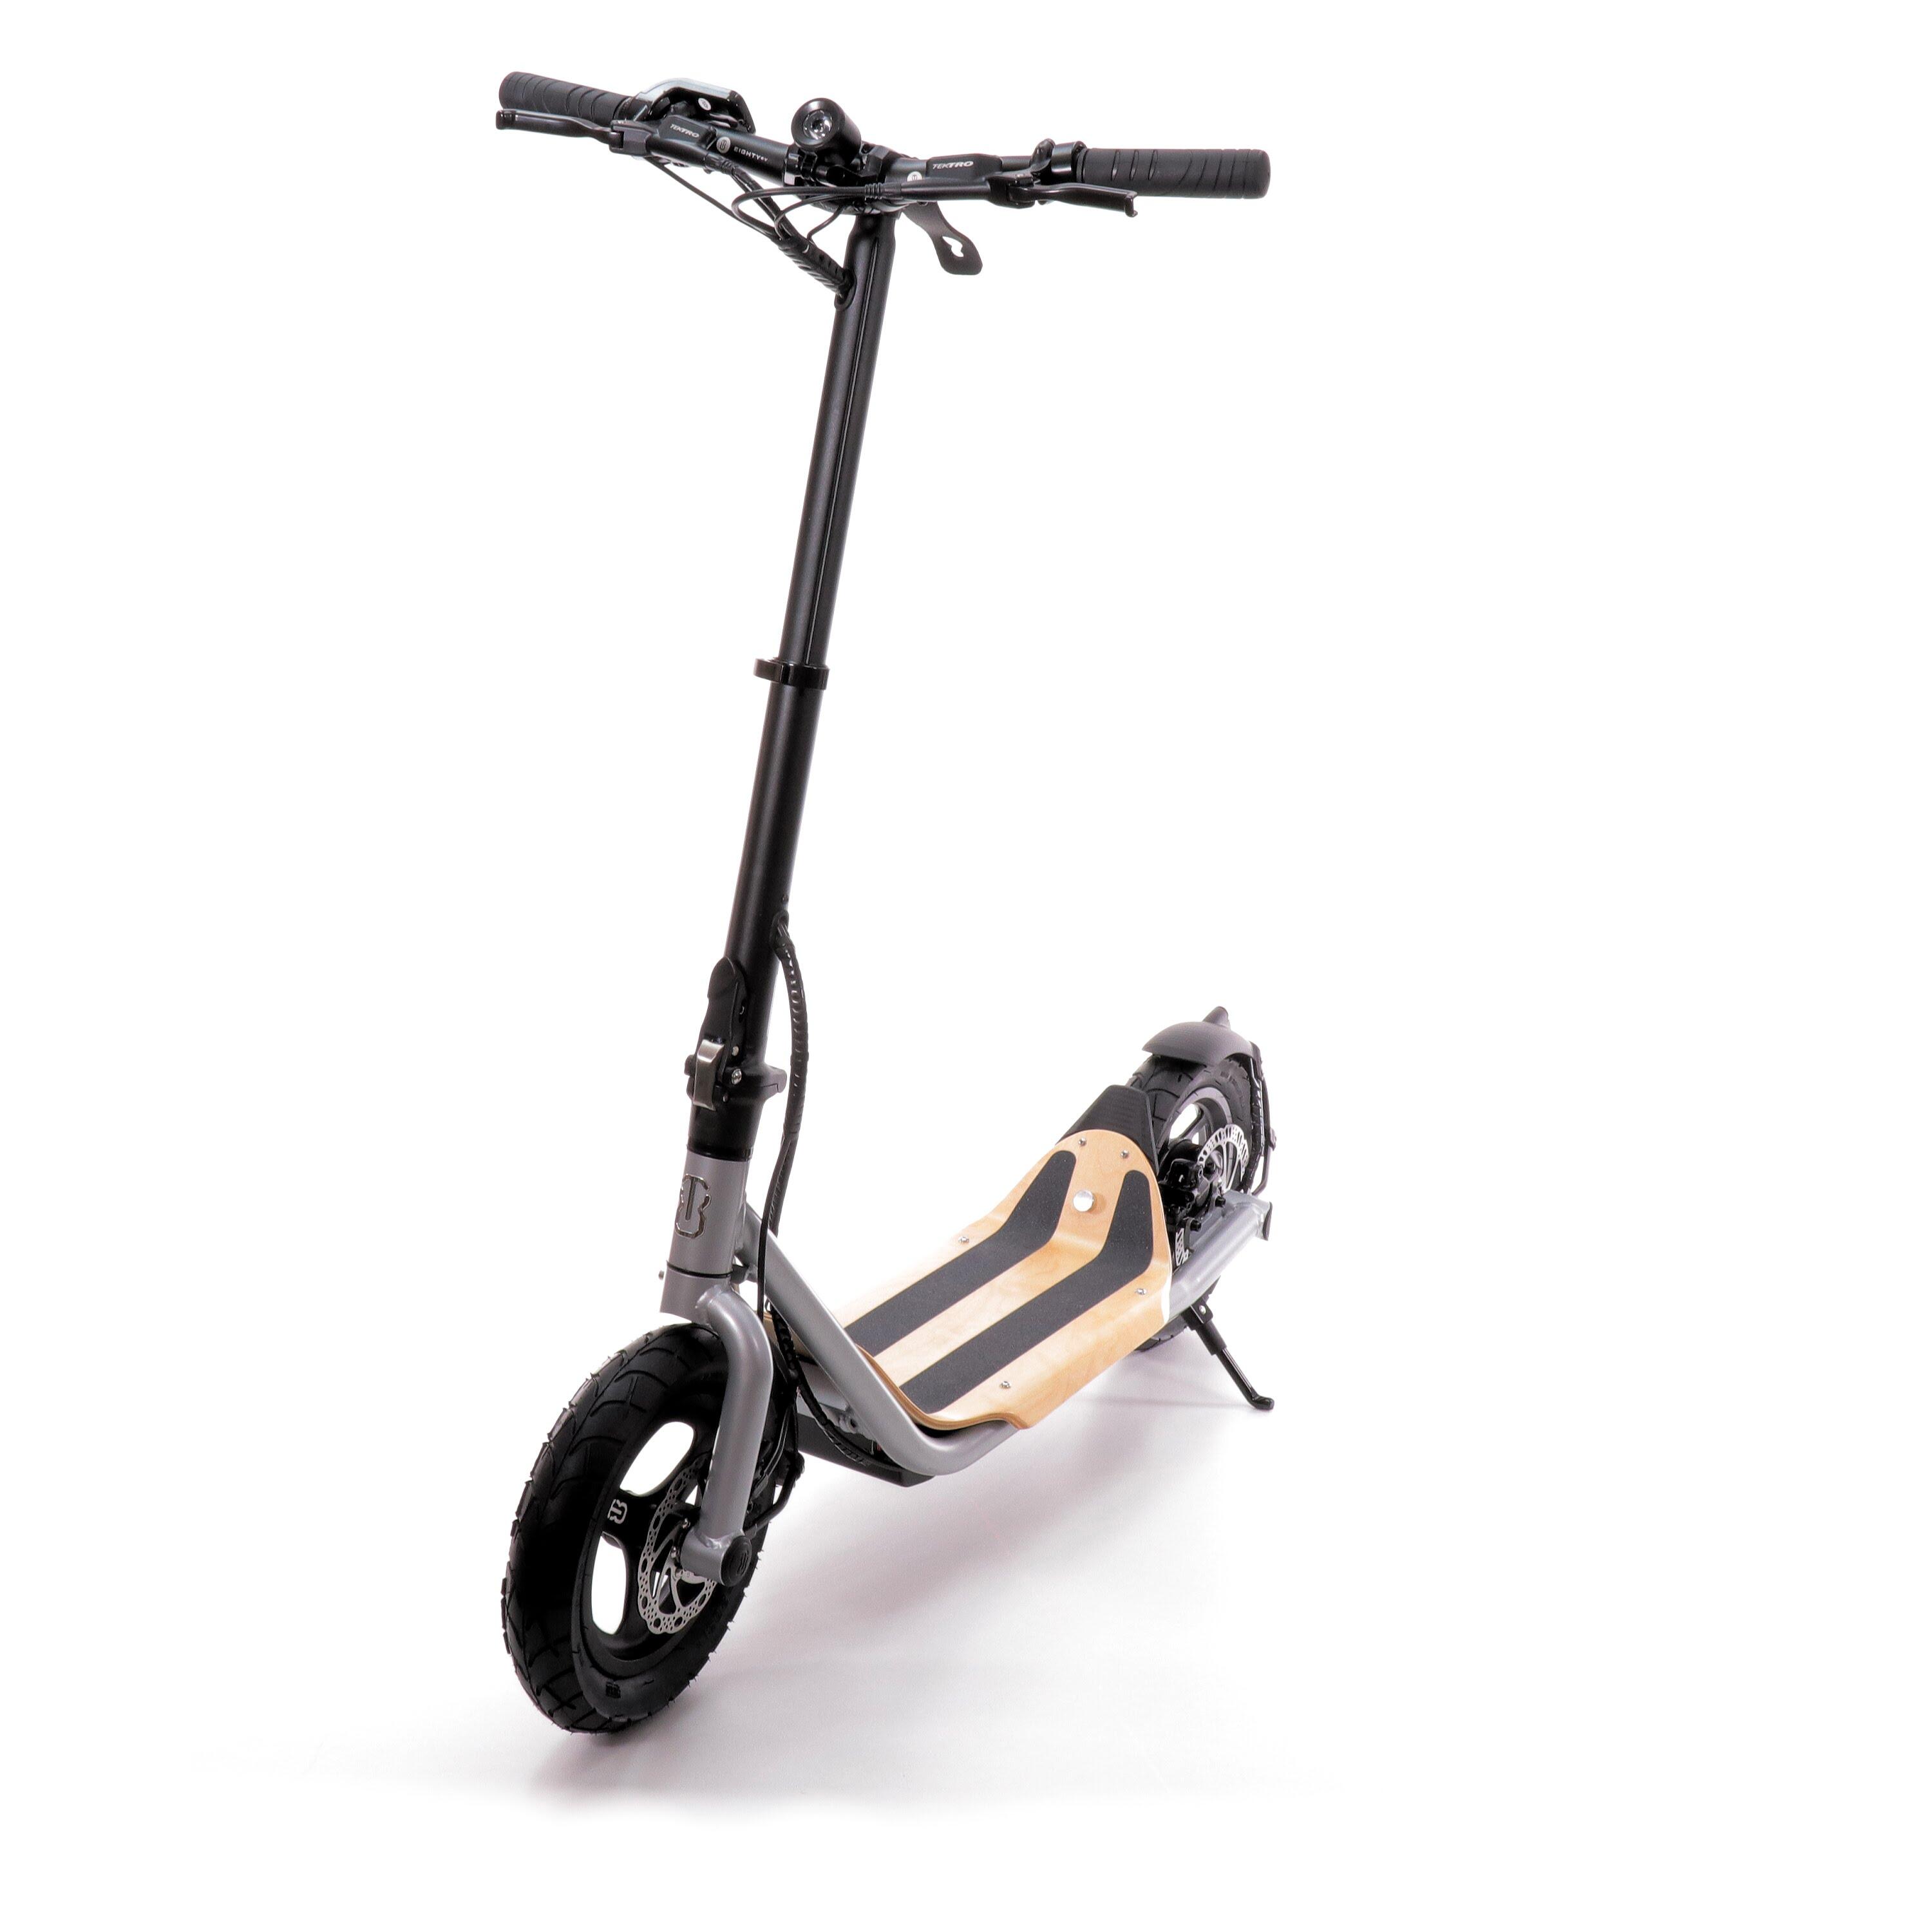 8Tev Adult Electric Scooter, B12 Classic, Silver 1/5